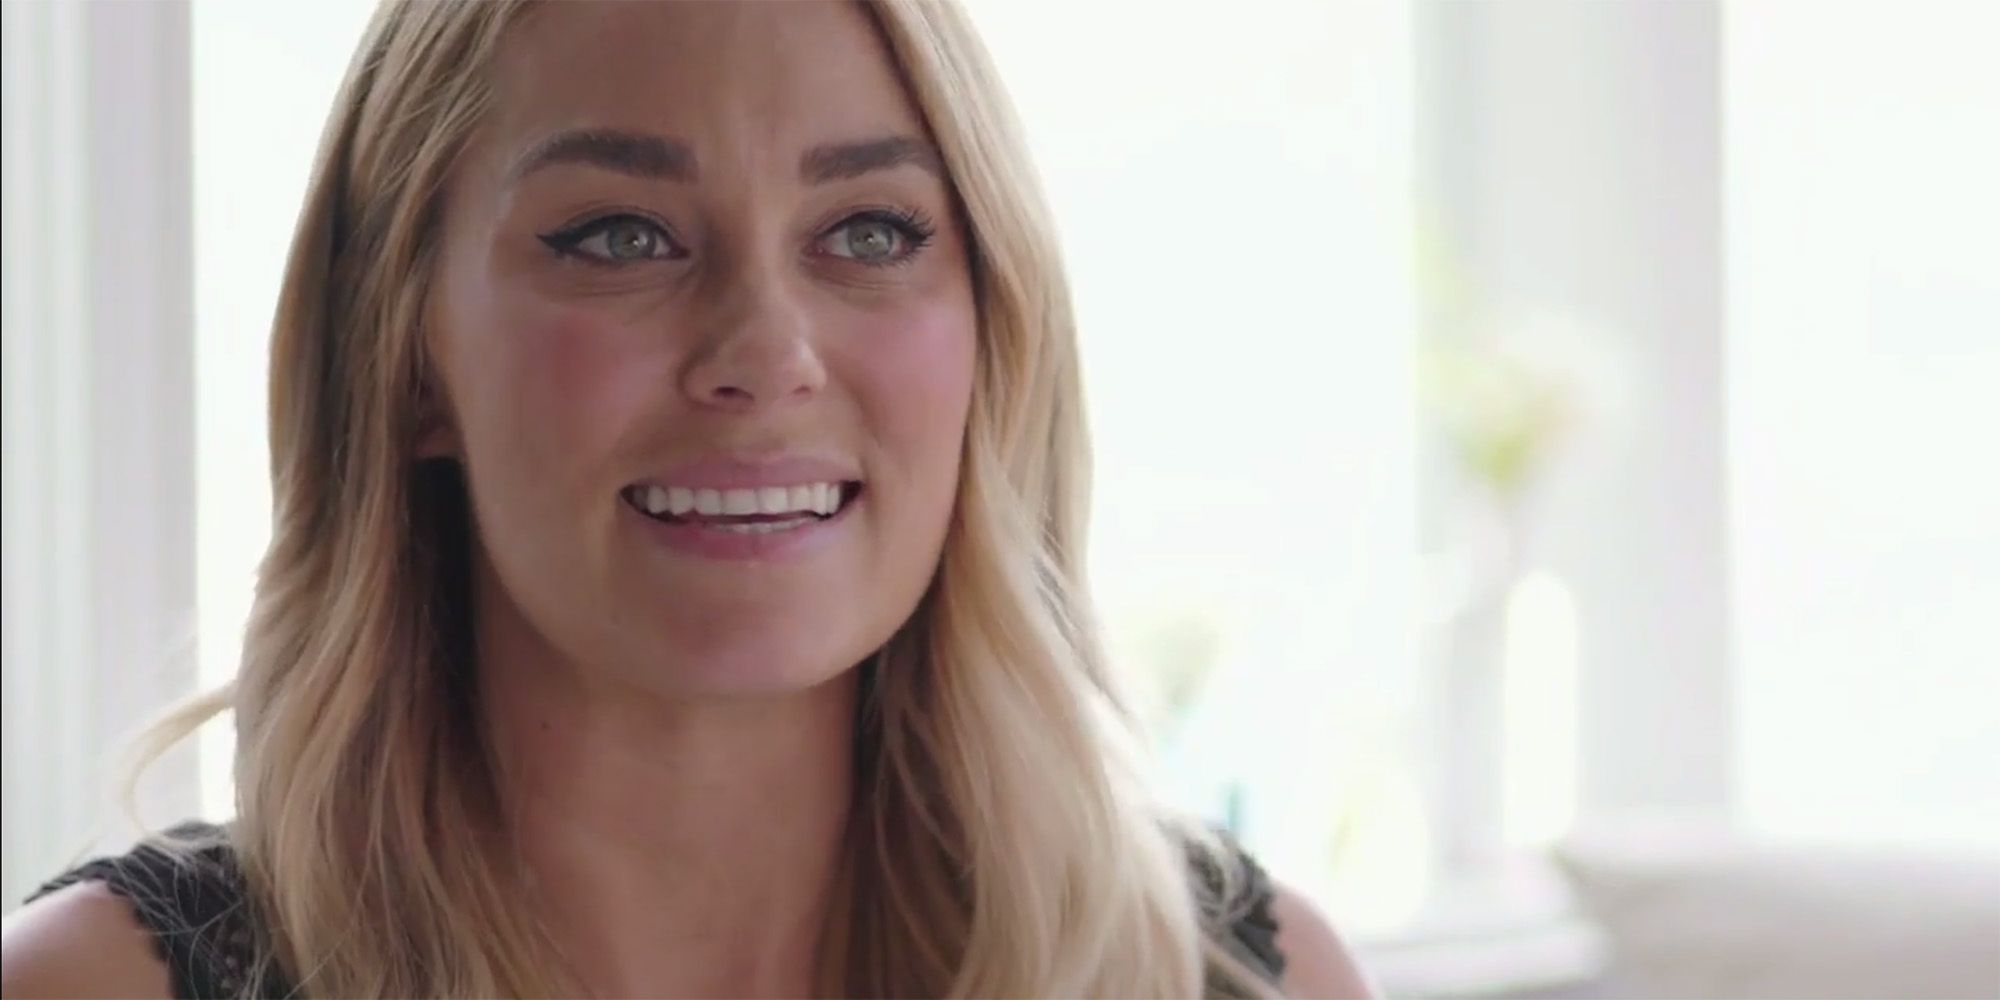 Lauren Conrad Says She's Fielding Network Offers for Her Reality Show